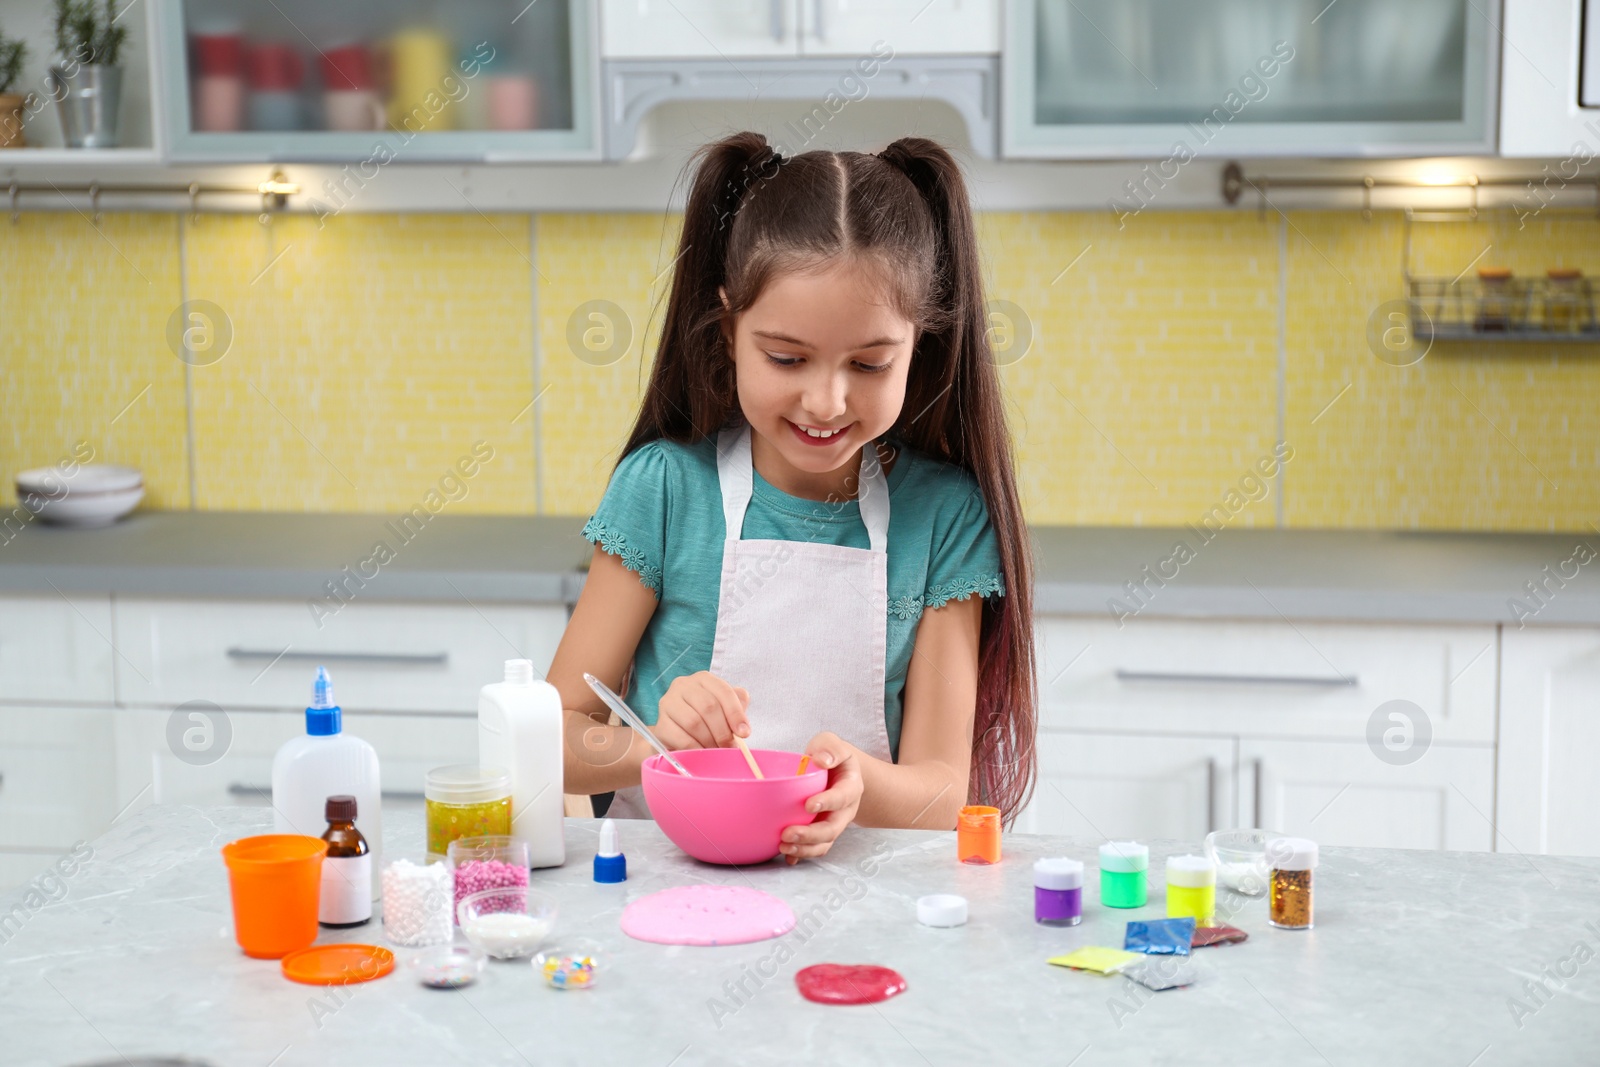 Photo of Cute little girl making homemade slime toy at table in kitchen